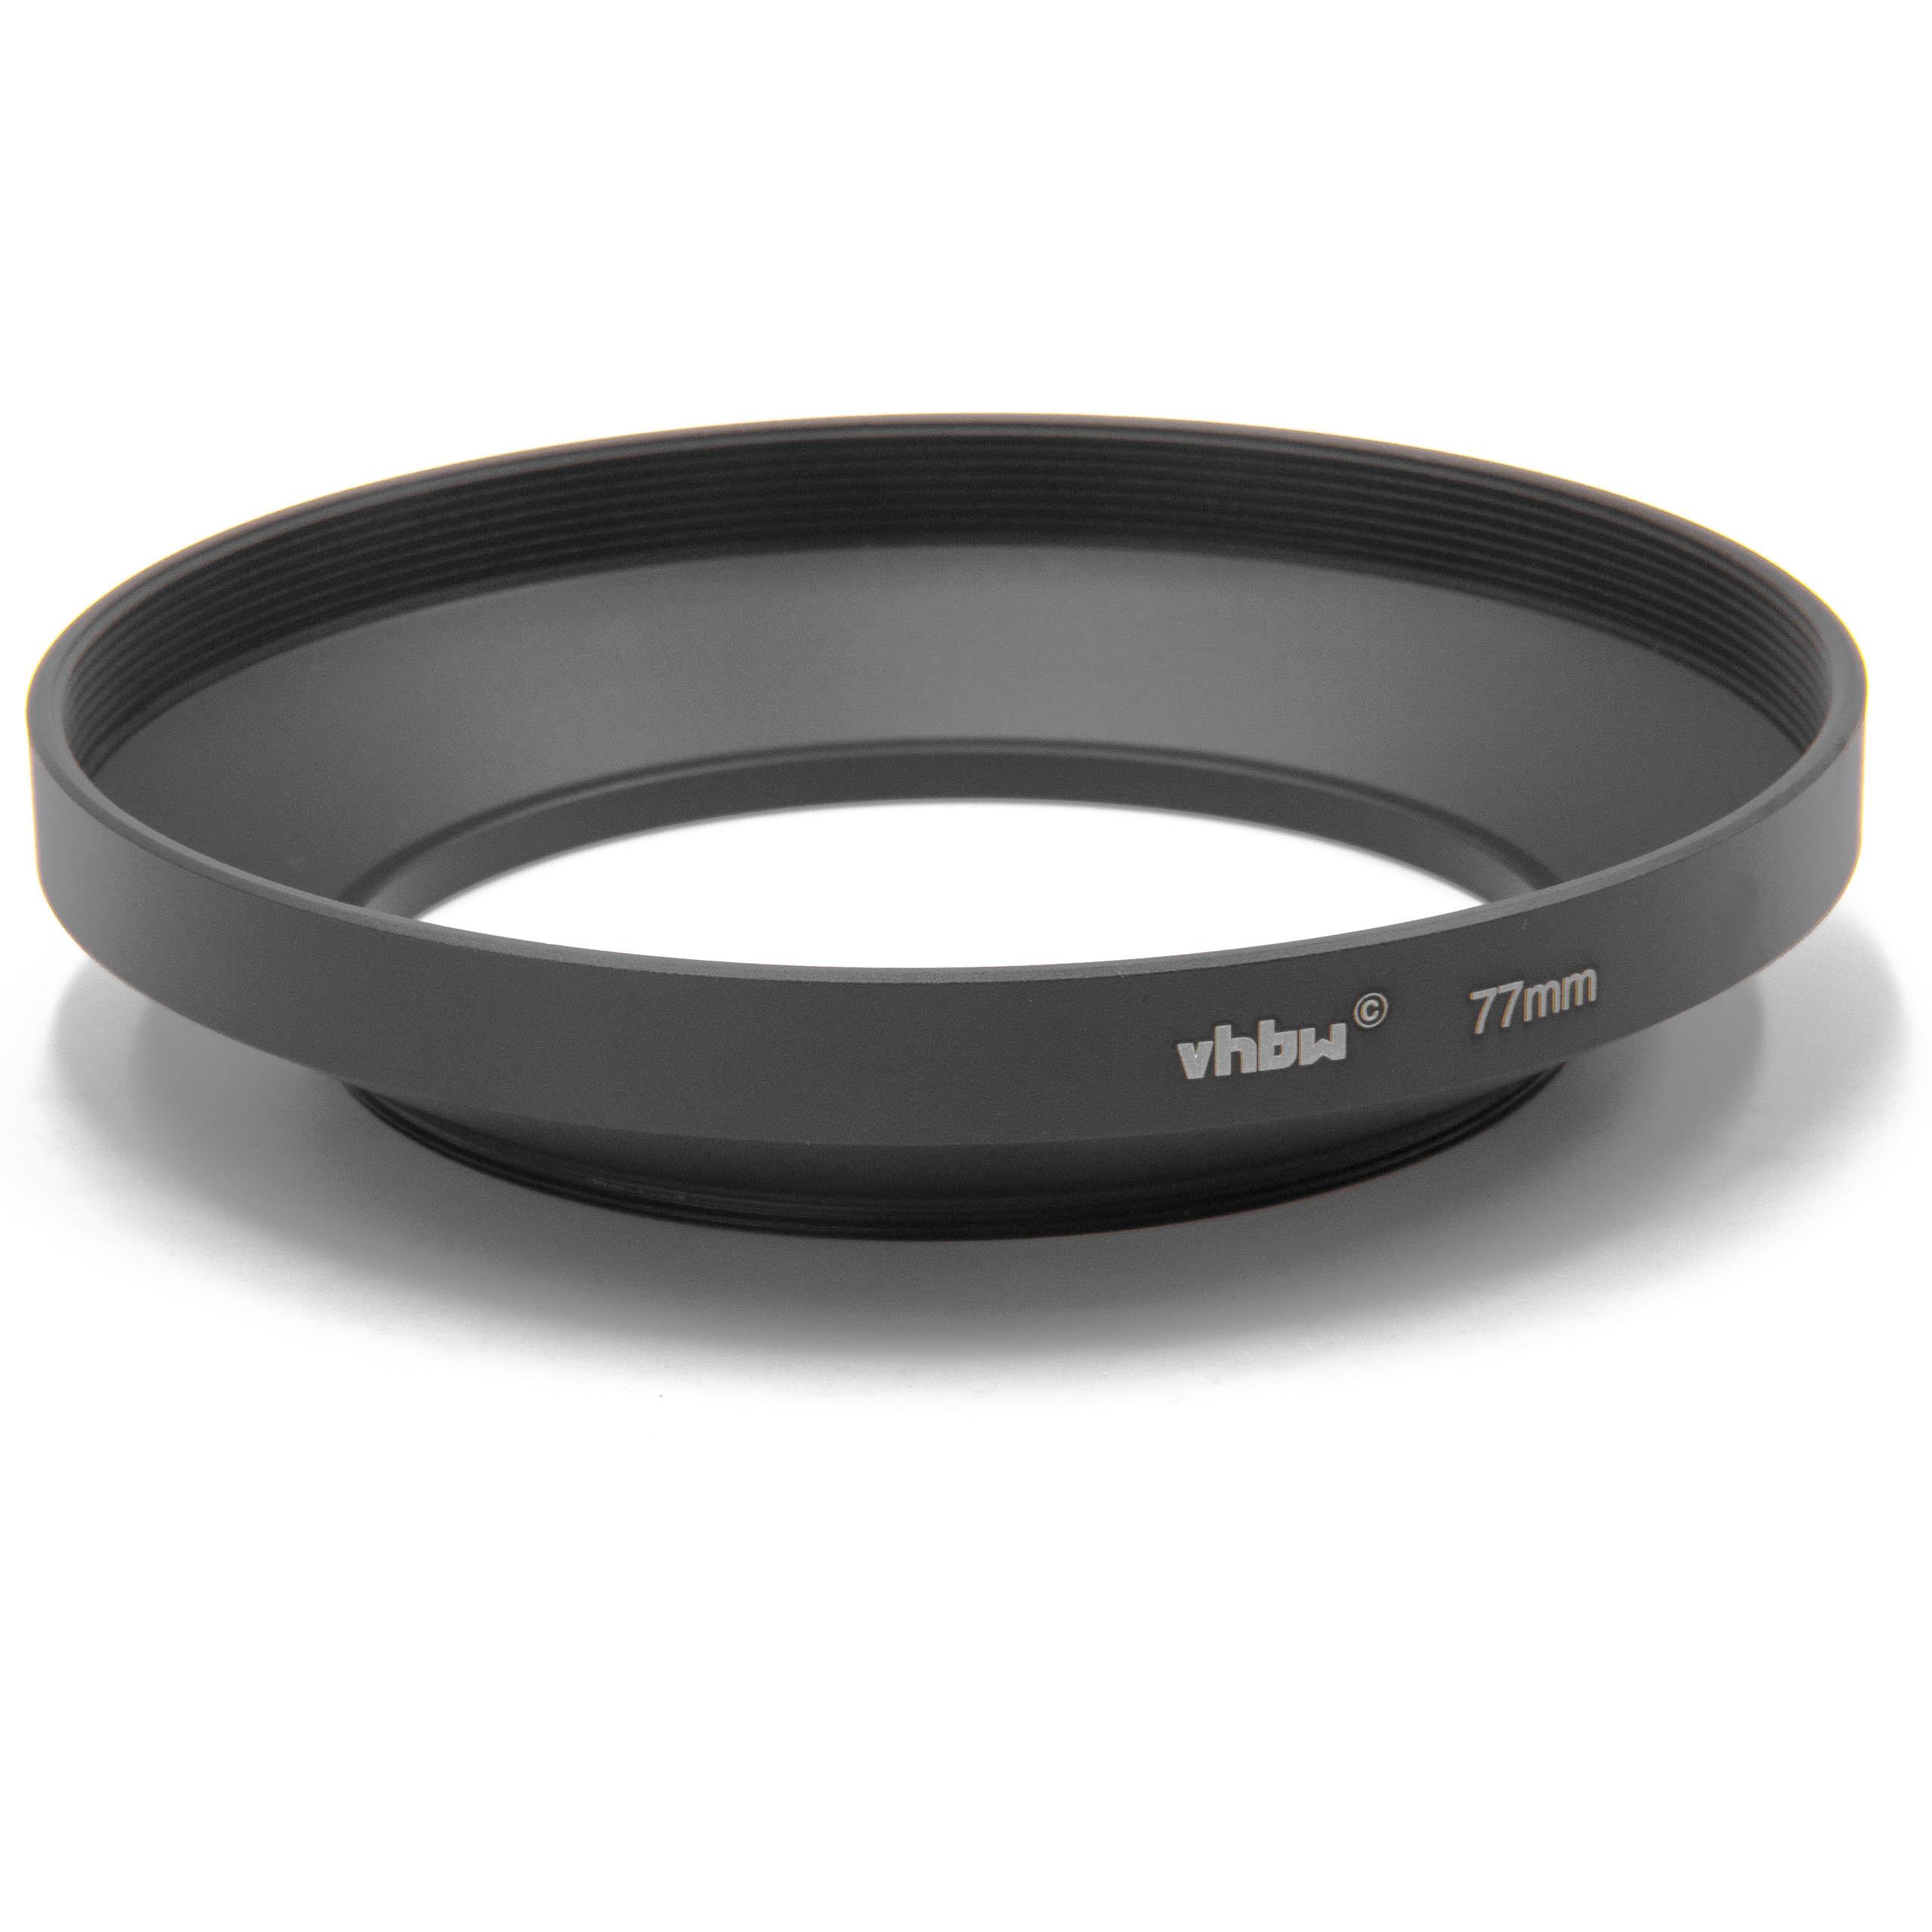 Lens Hood suitable for 77mm Lens - Wide-Angle Lens Shade Black, Round